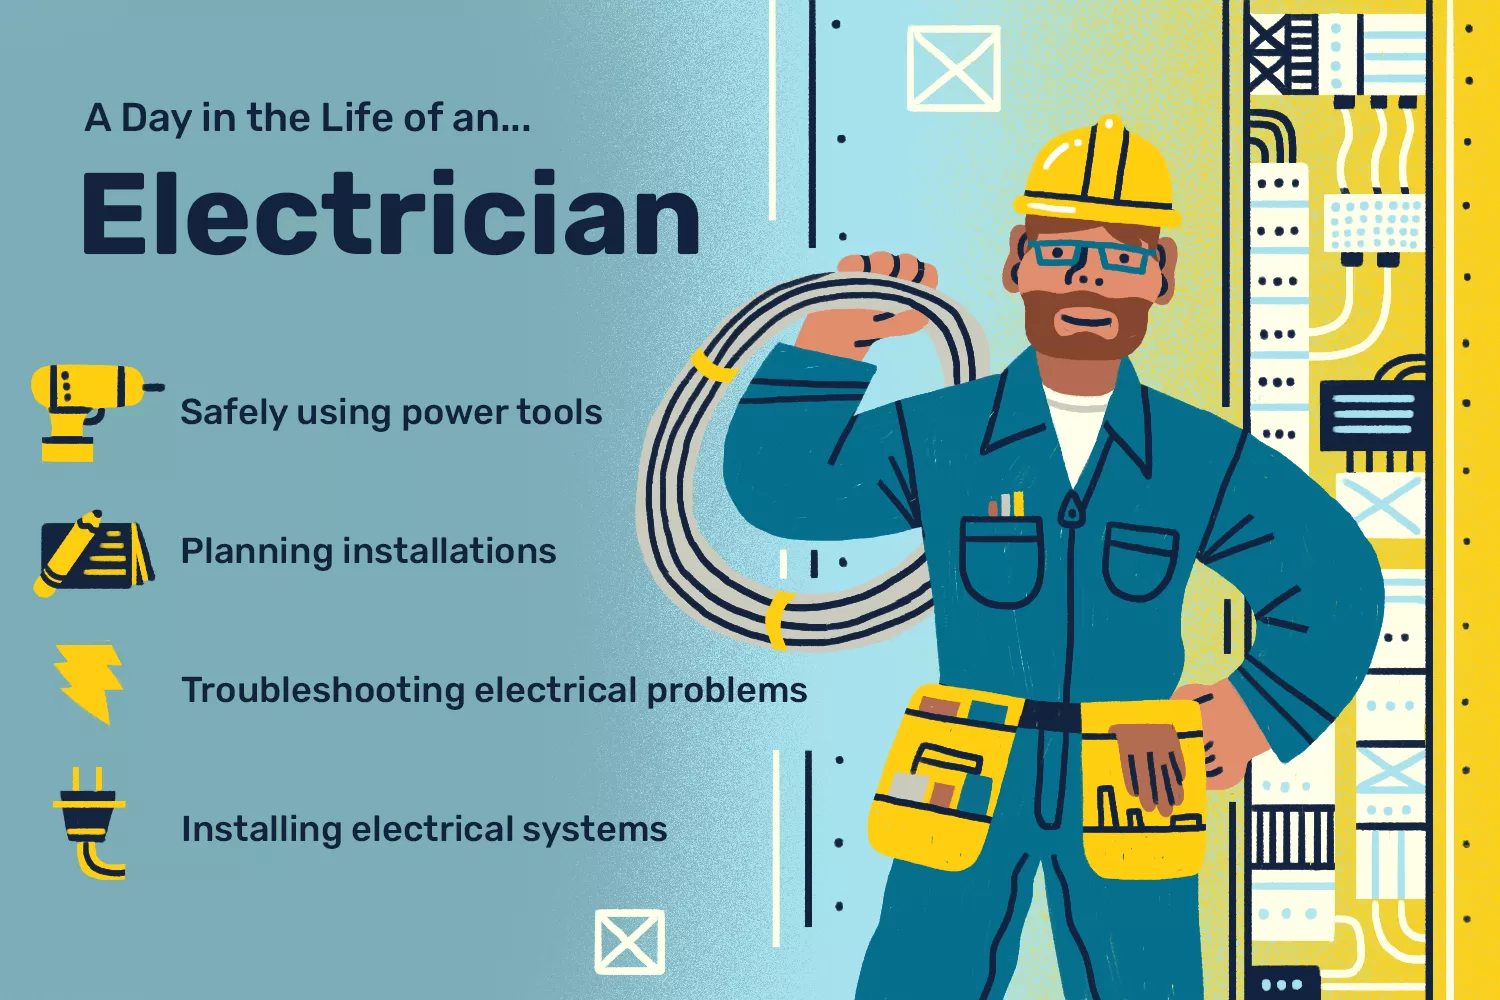 What type of work do electricians typically do? Our electrician amsterdam can do more!